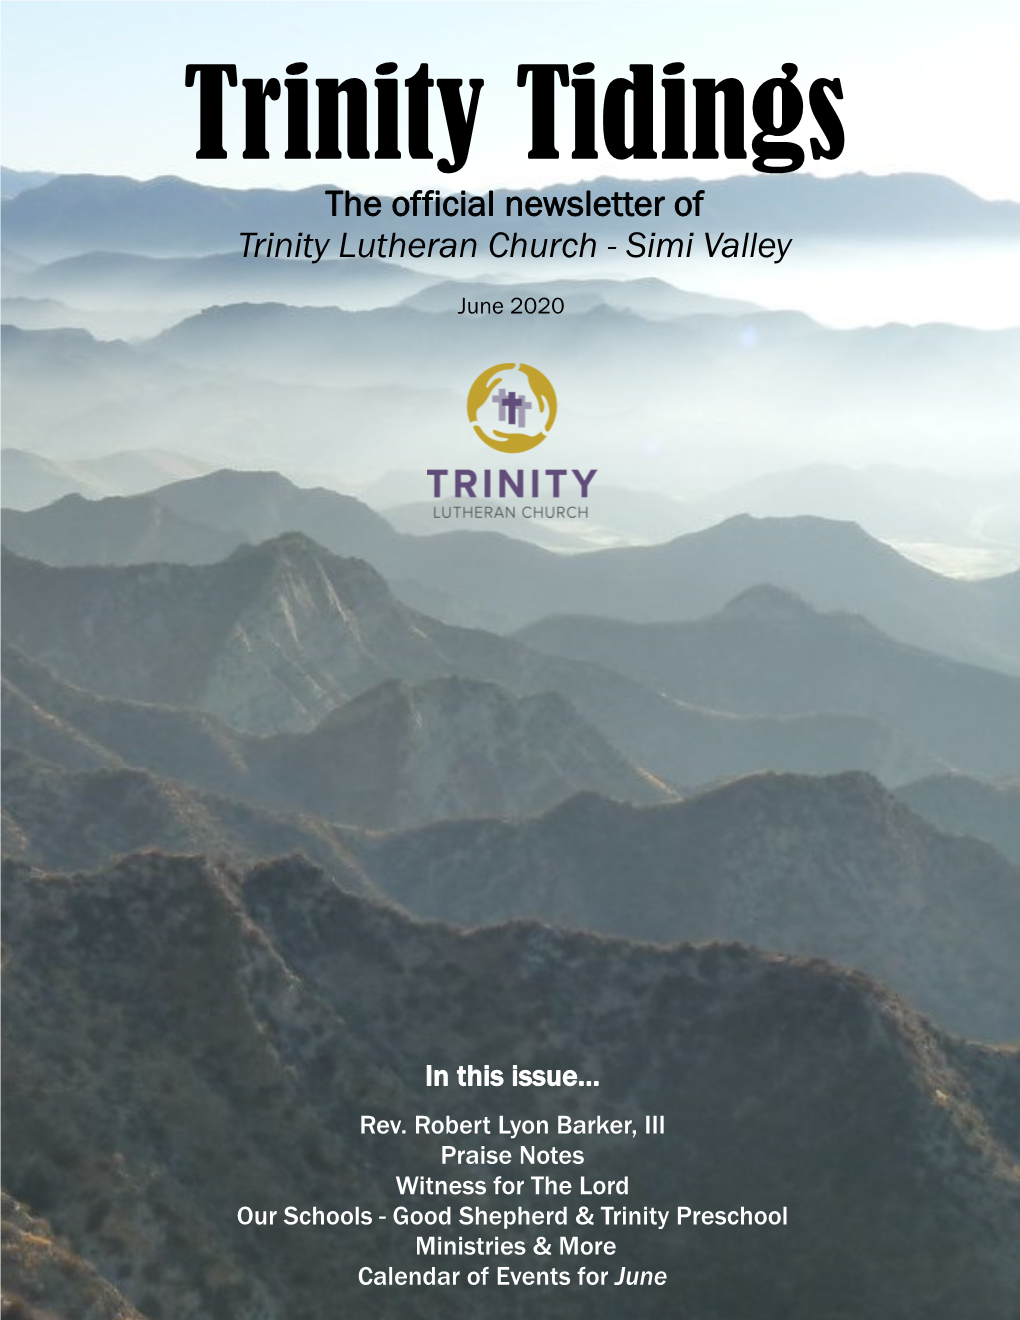 The Official Newsletter of Trinity Lutheran Church - Simi Valley